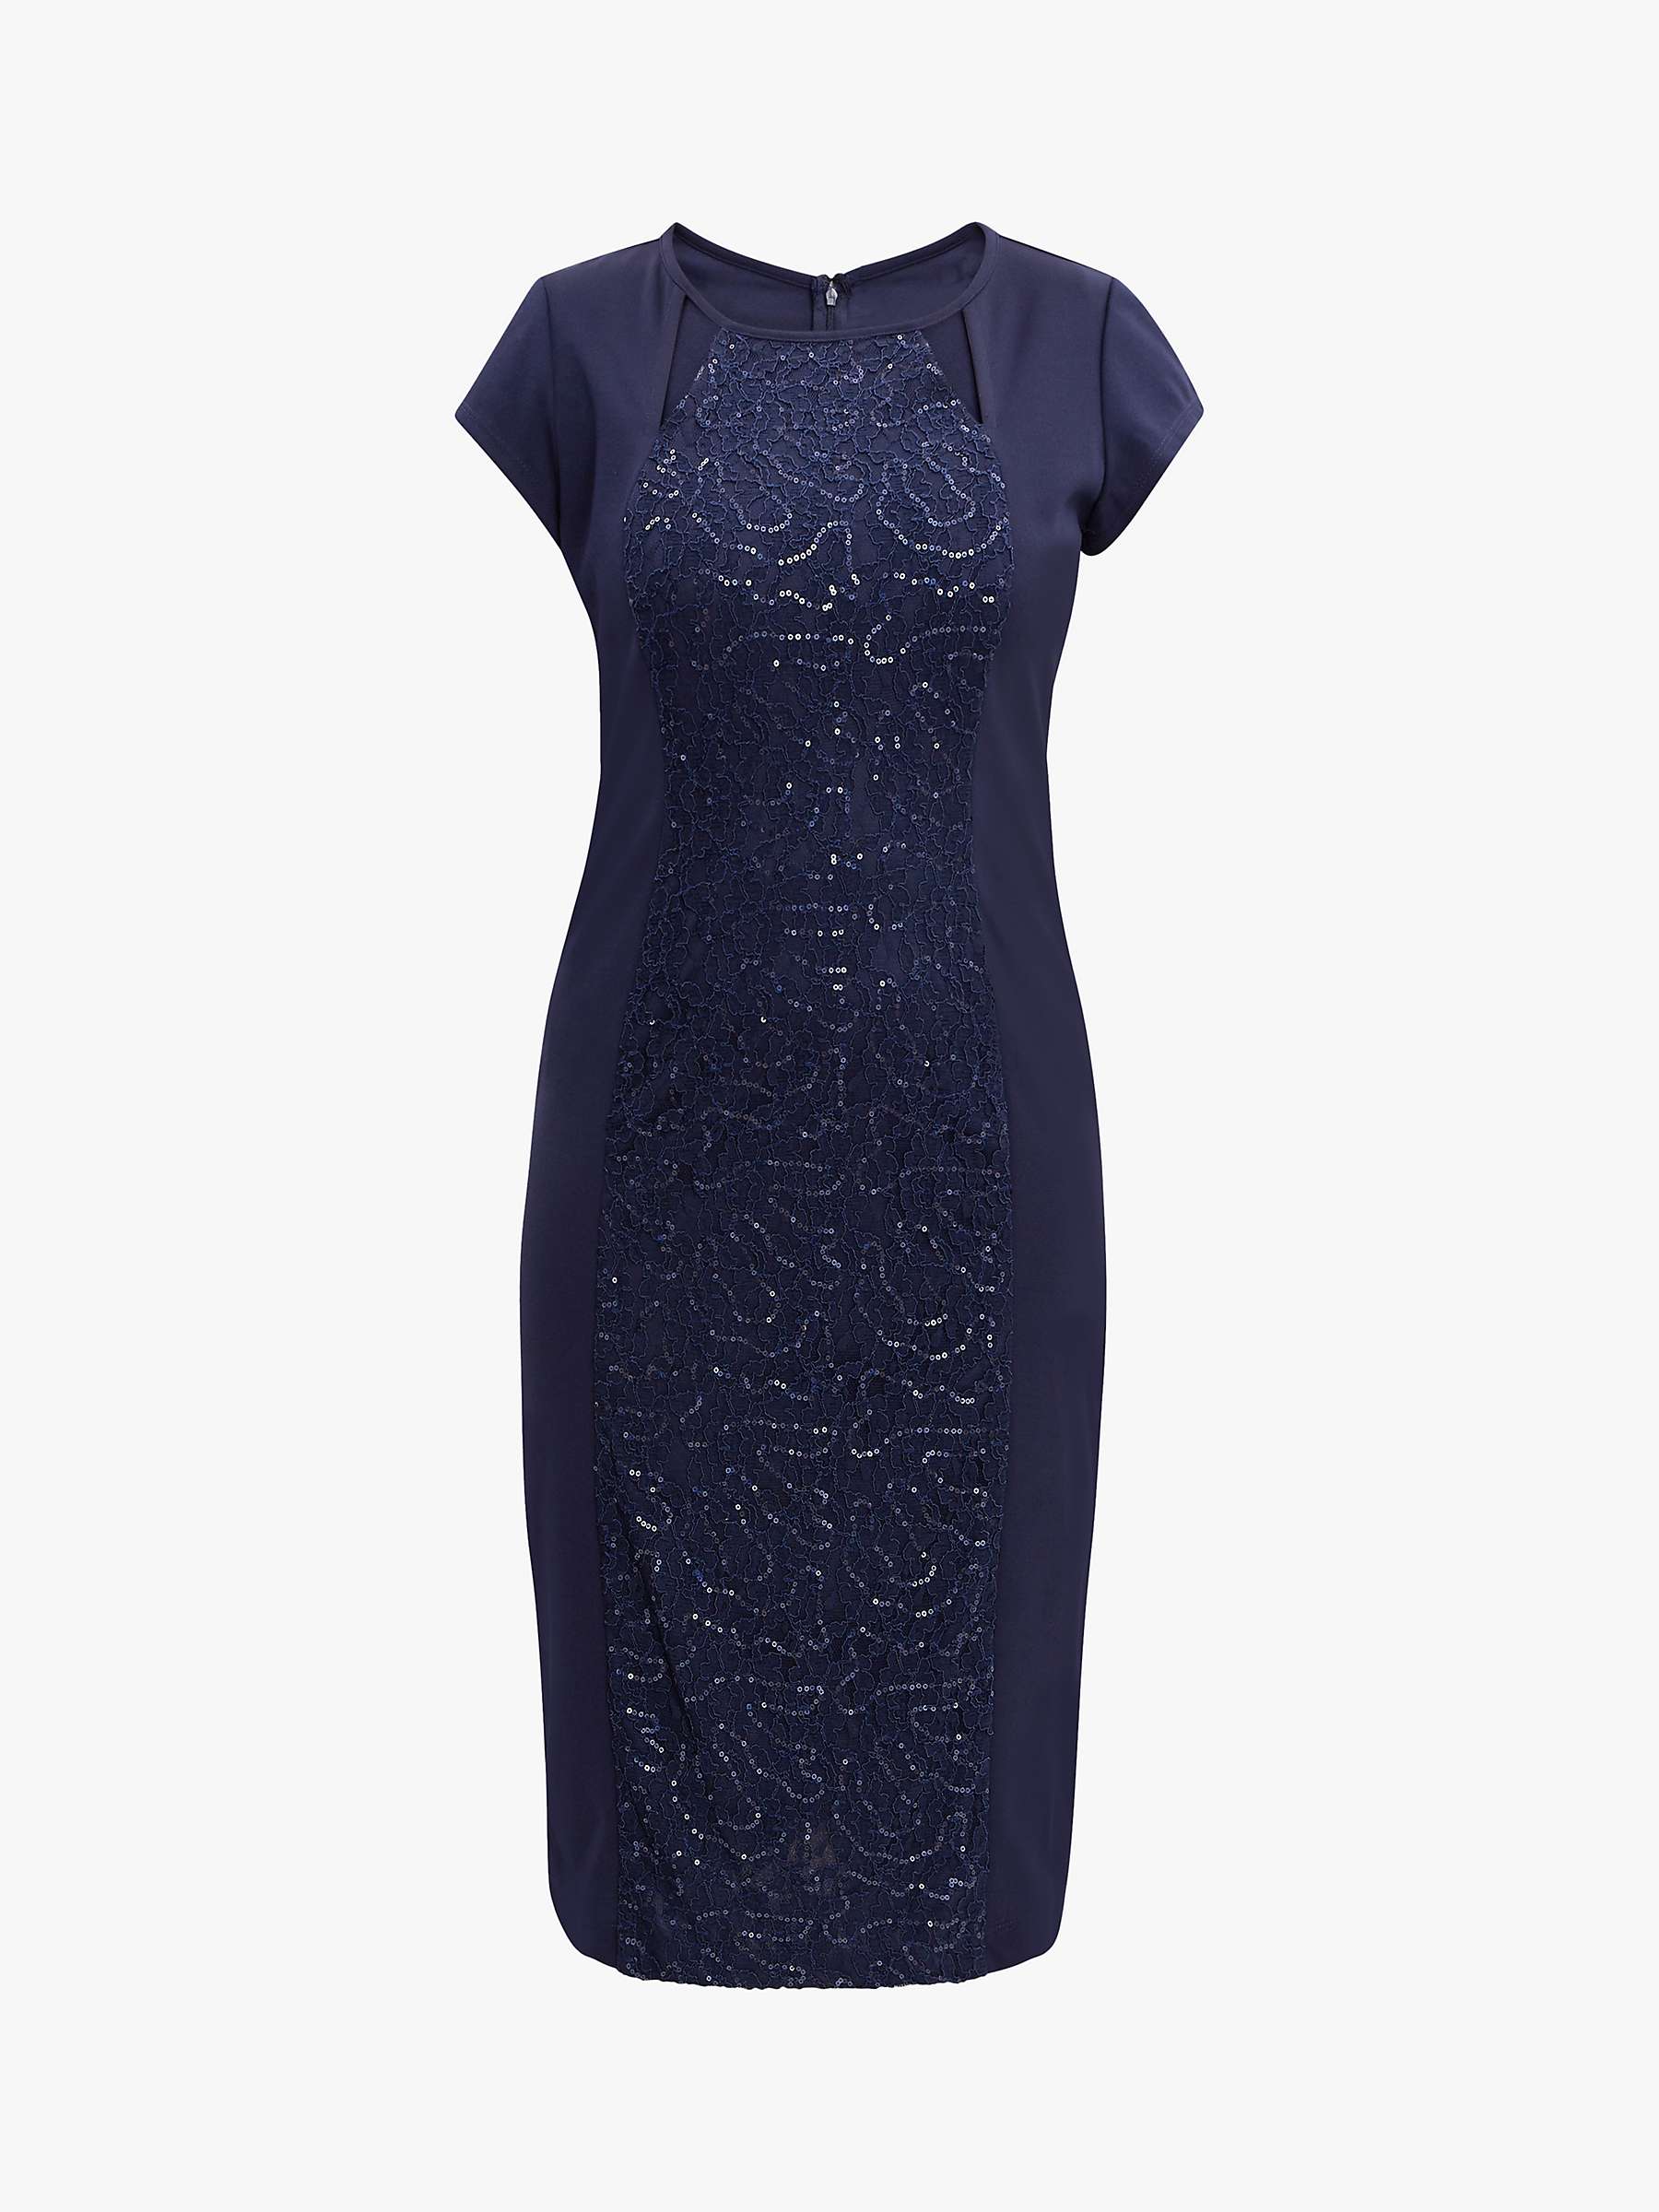 Buy Gina Bacconi Gilly Lace Panel Shift Dress, Navy Online at johnlewis.com